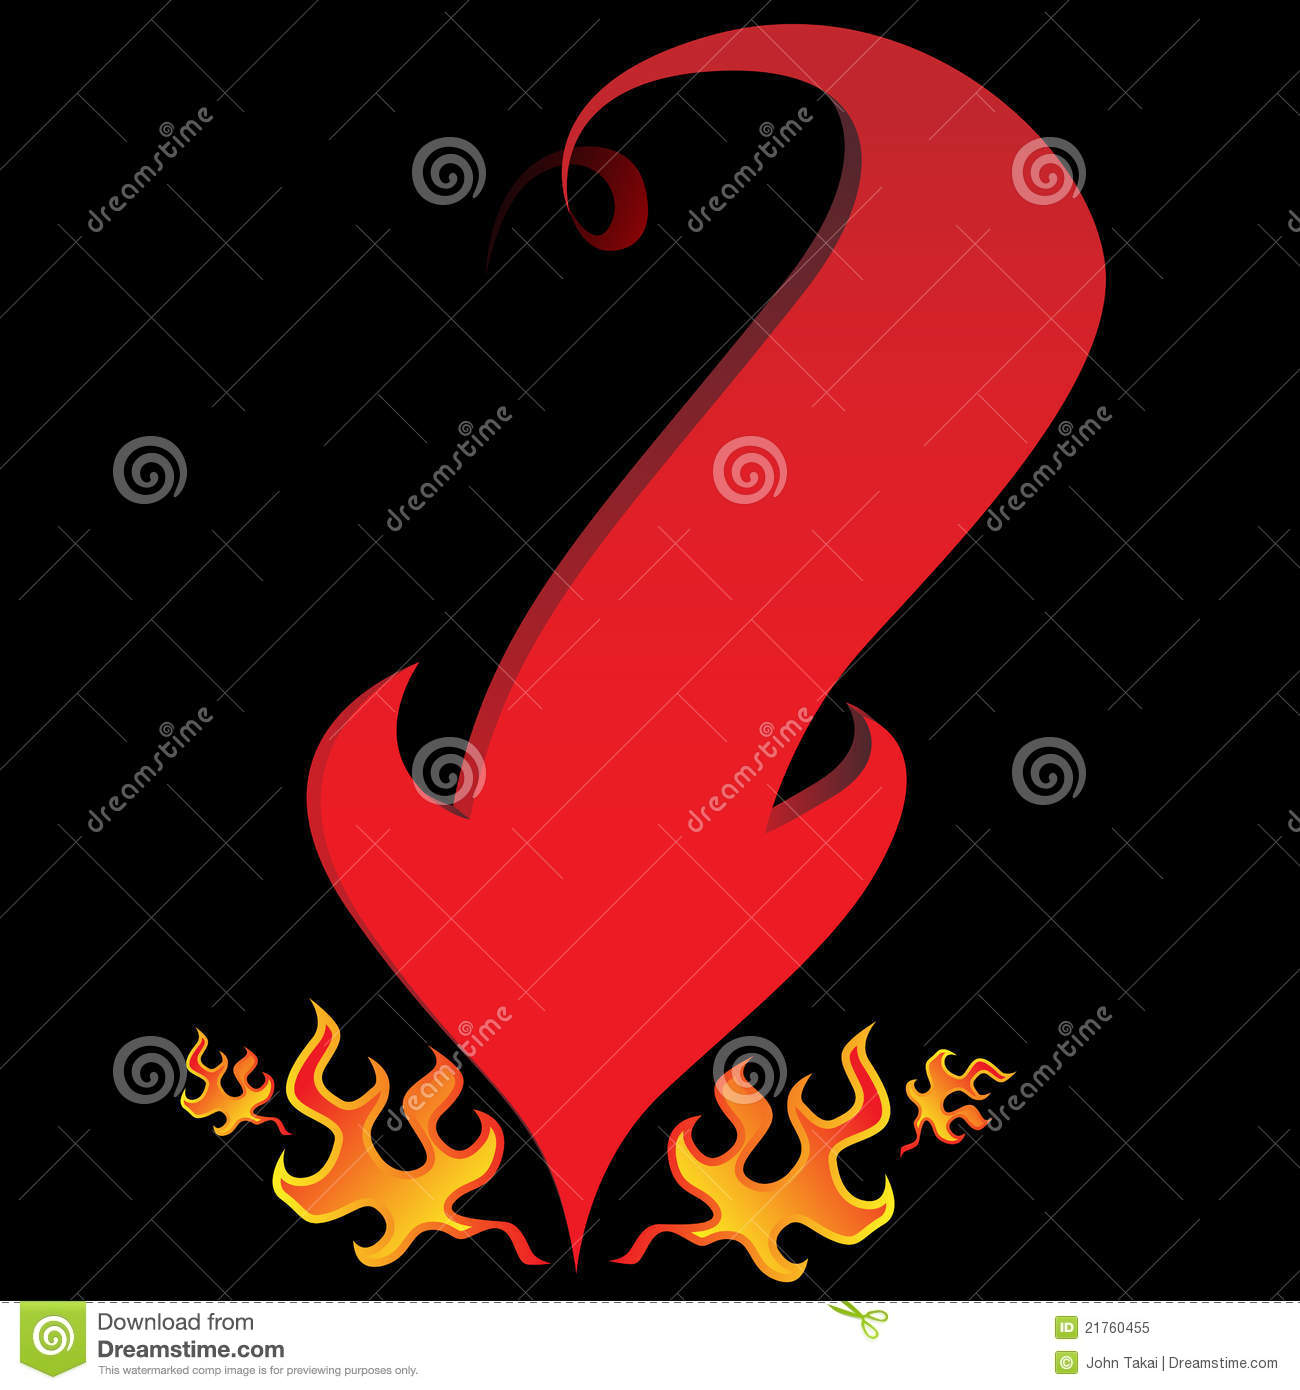 An Image Of An Devil Tail Arrow With Flames On A Black Background